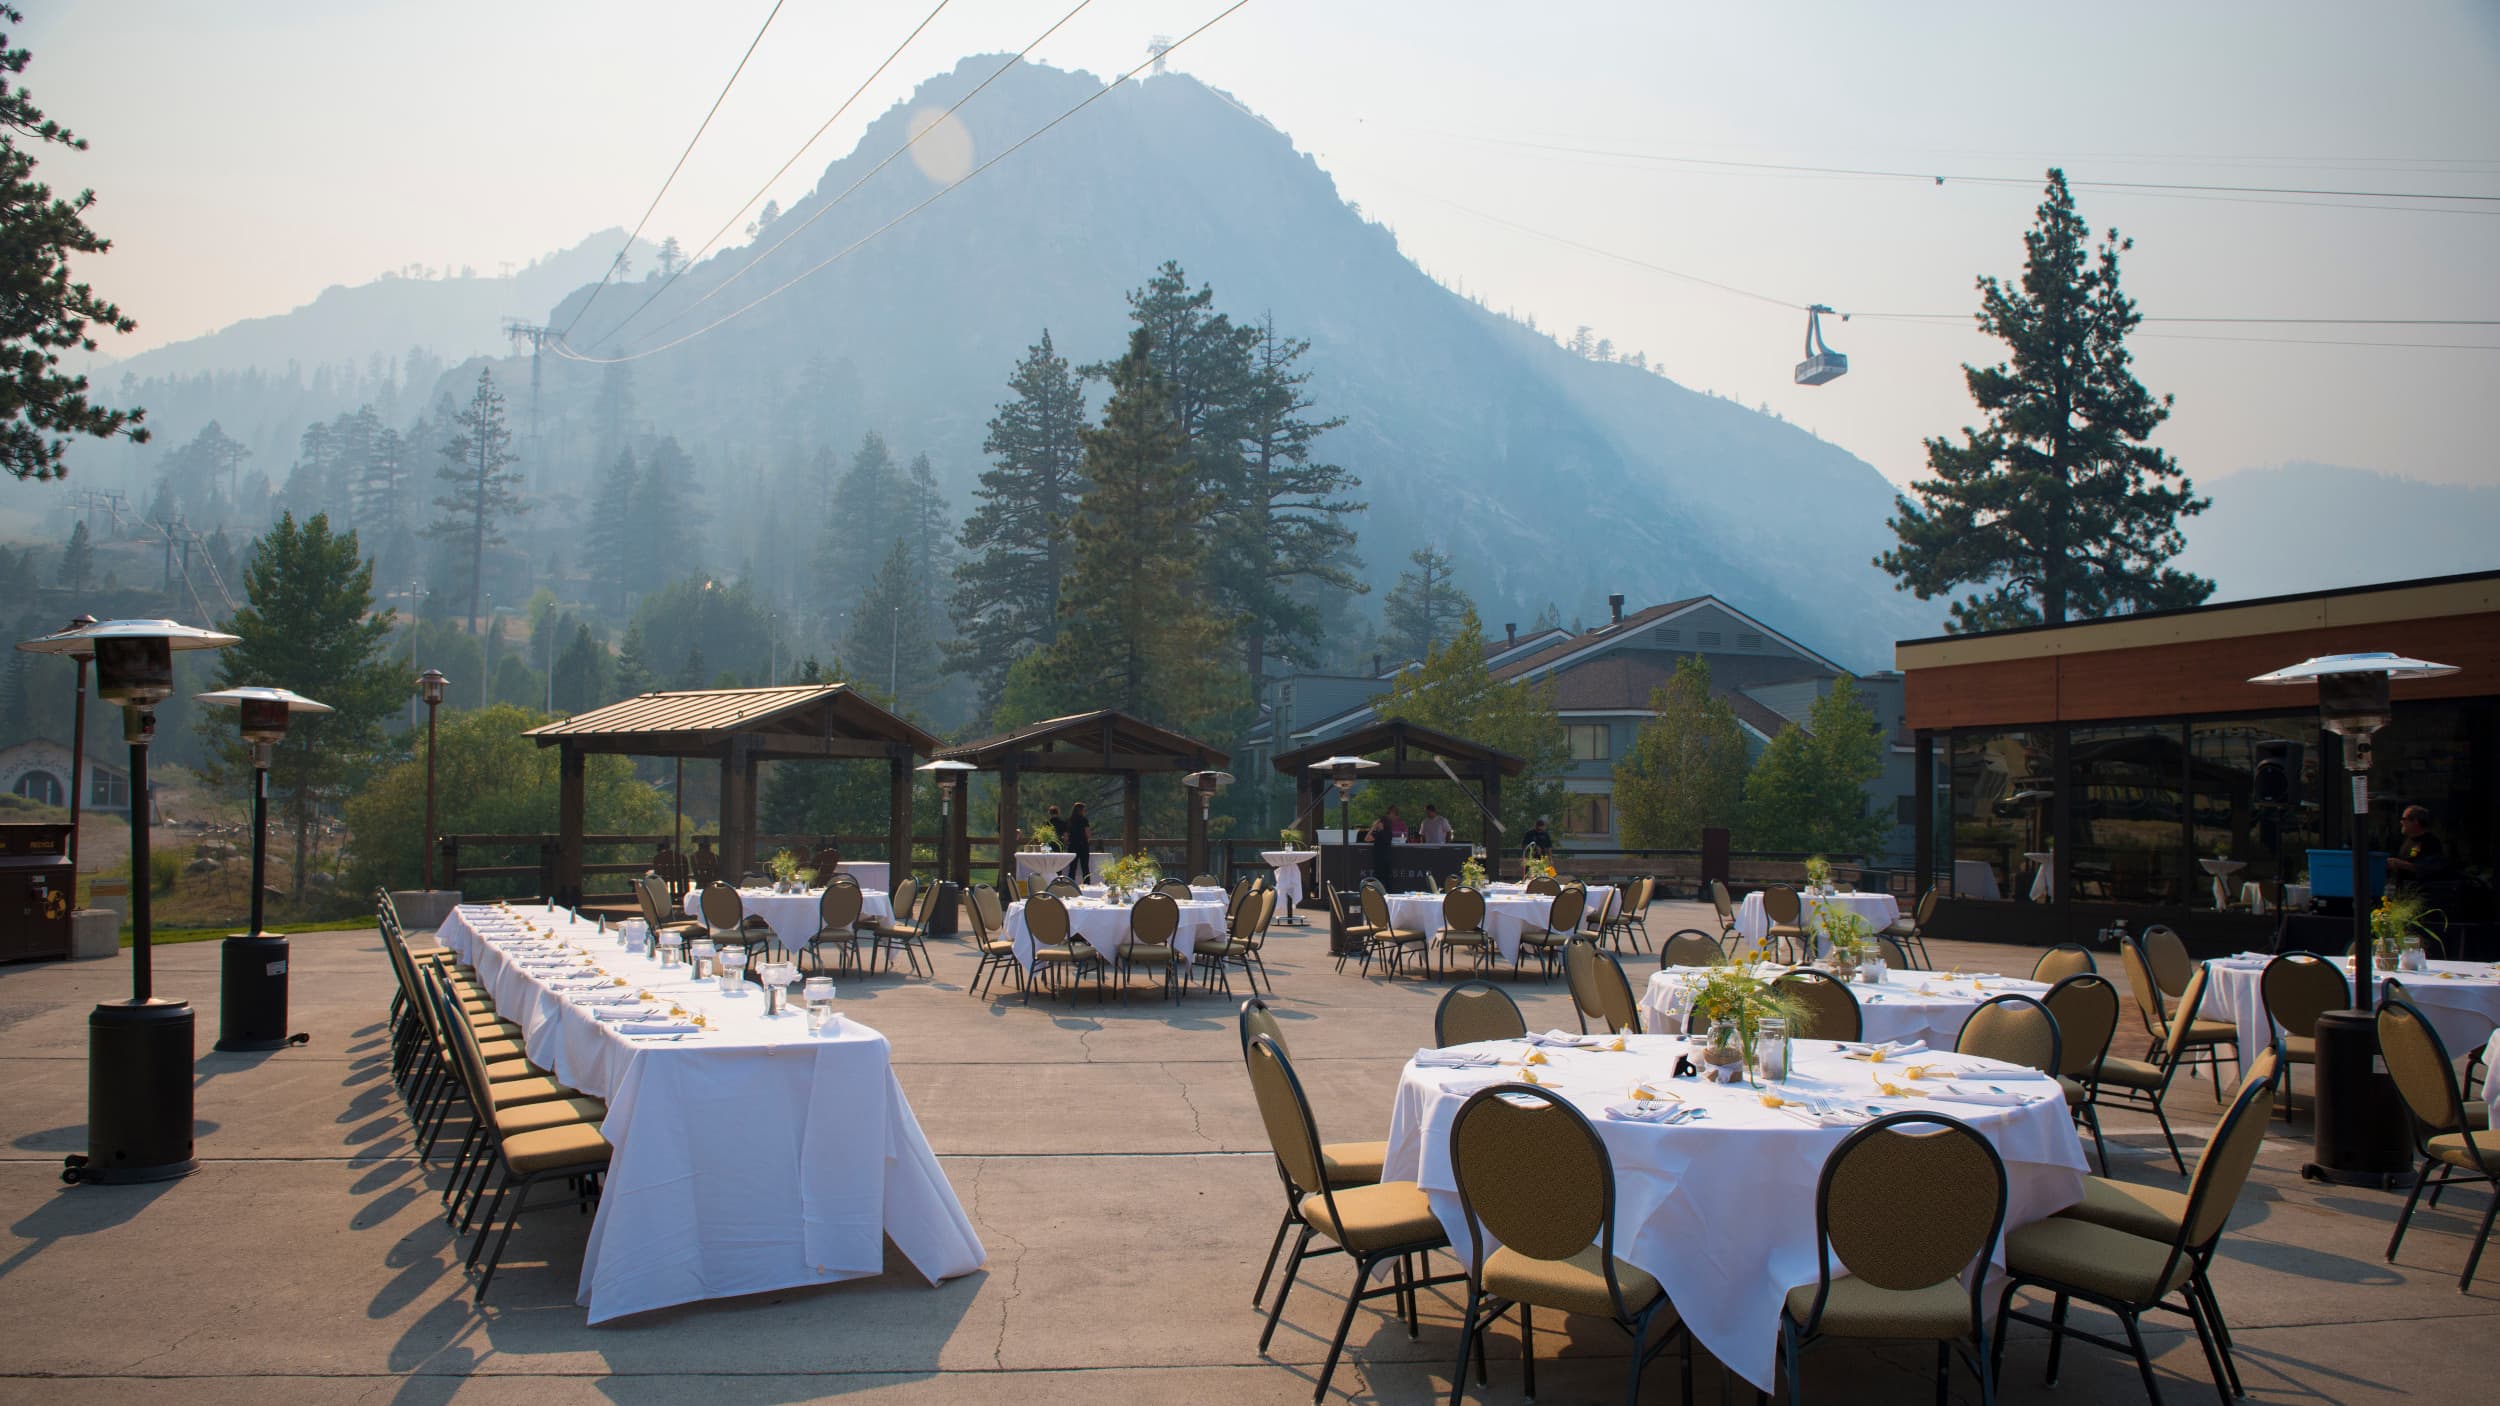 KT Base wedding in Olympic Valley at Palisades Tahoe